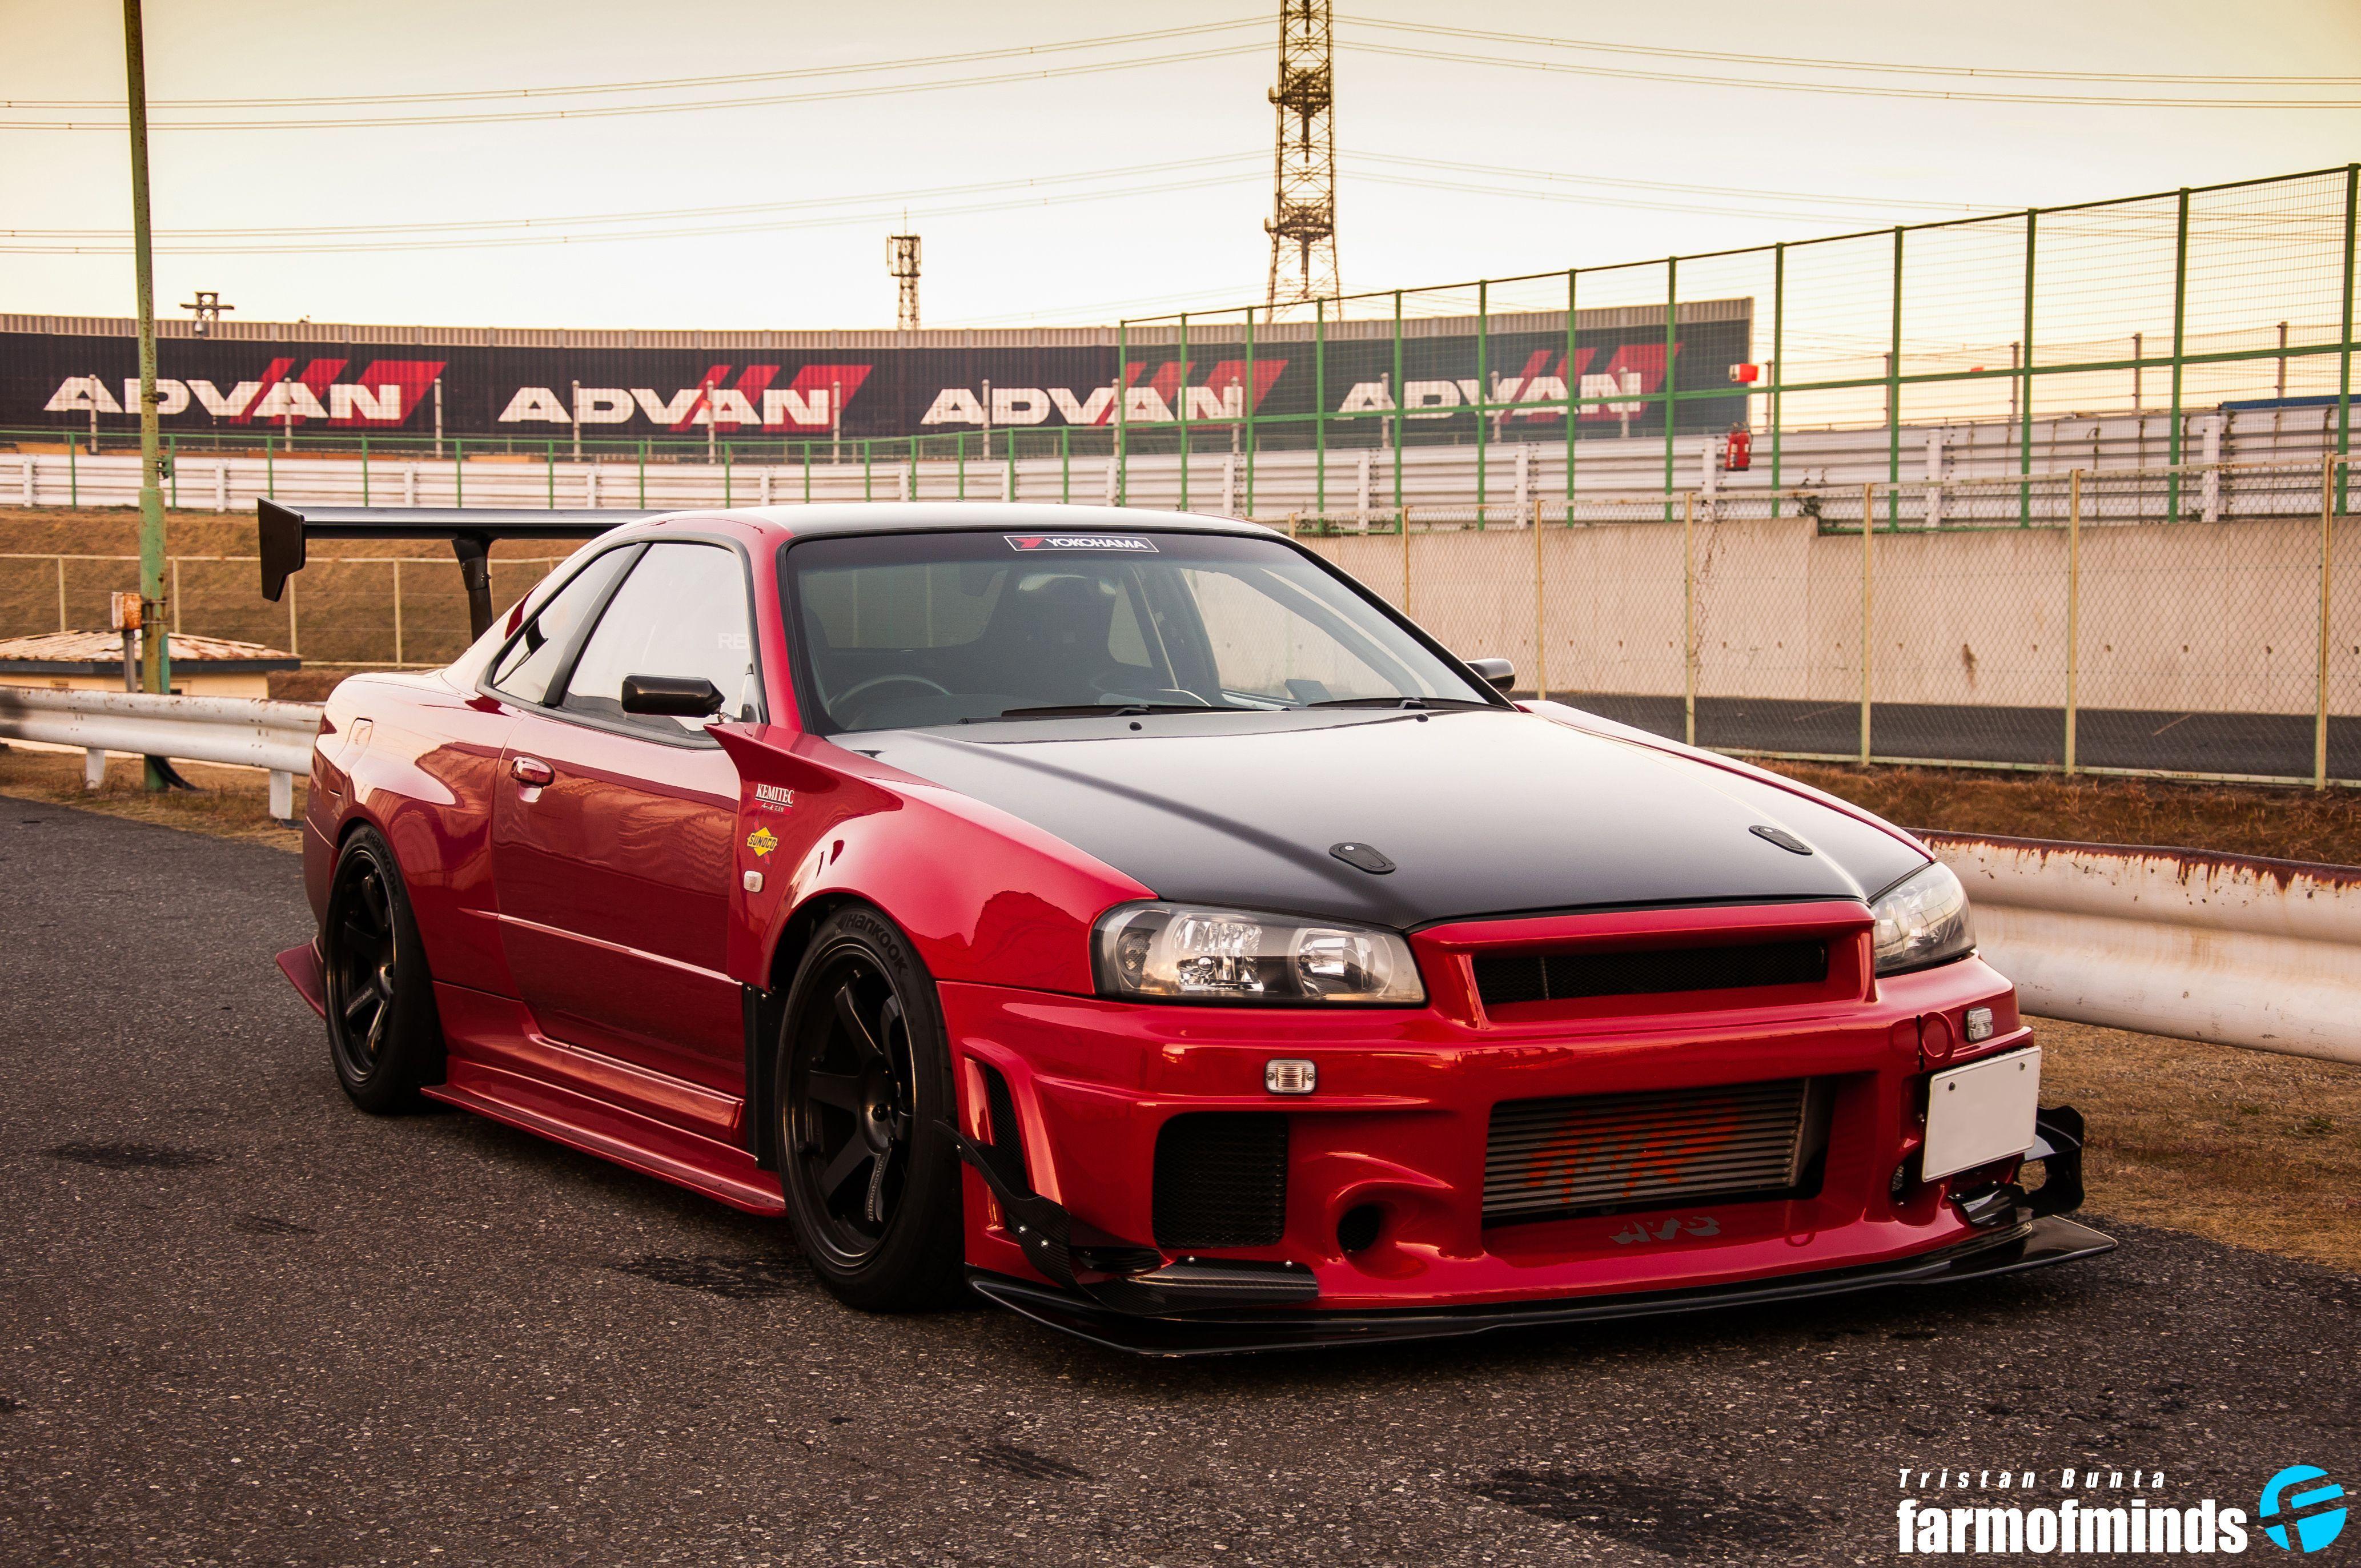 Red Nissan Skyline Wallpapers Top Free Red Nissan Skyline Backgrounds Wallpaperaccess